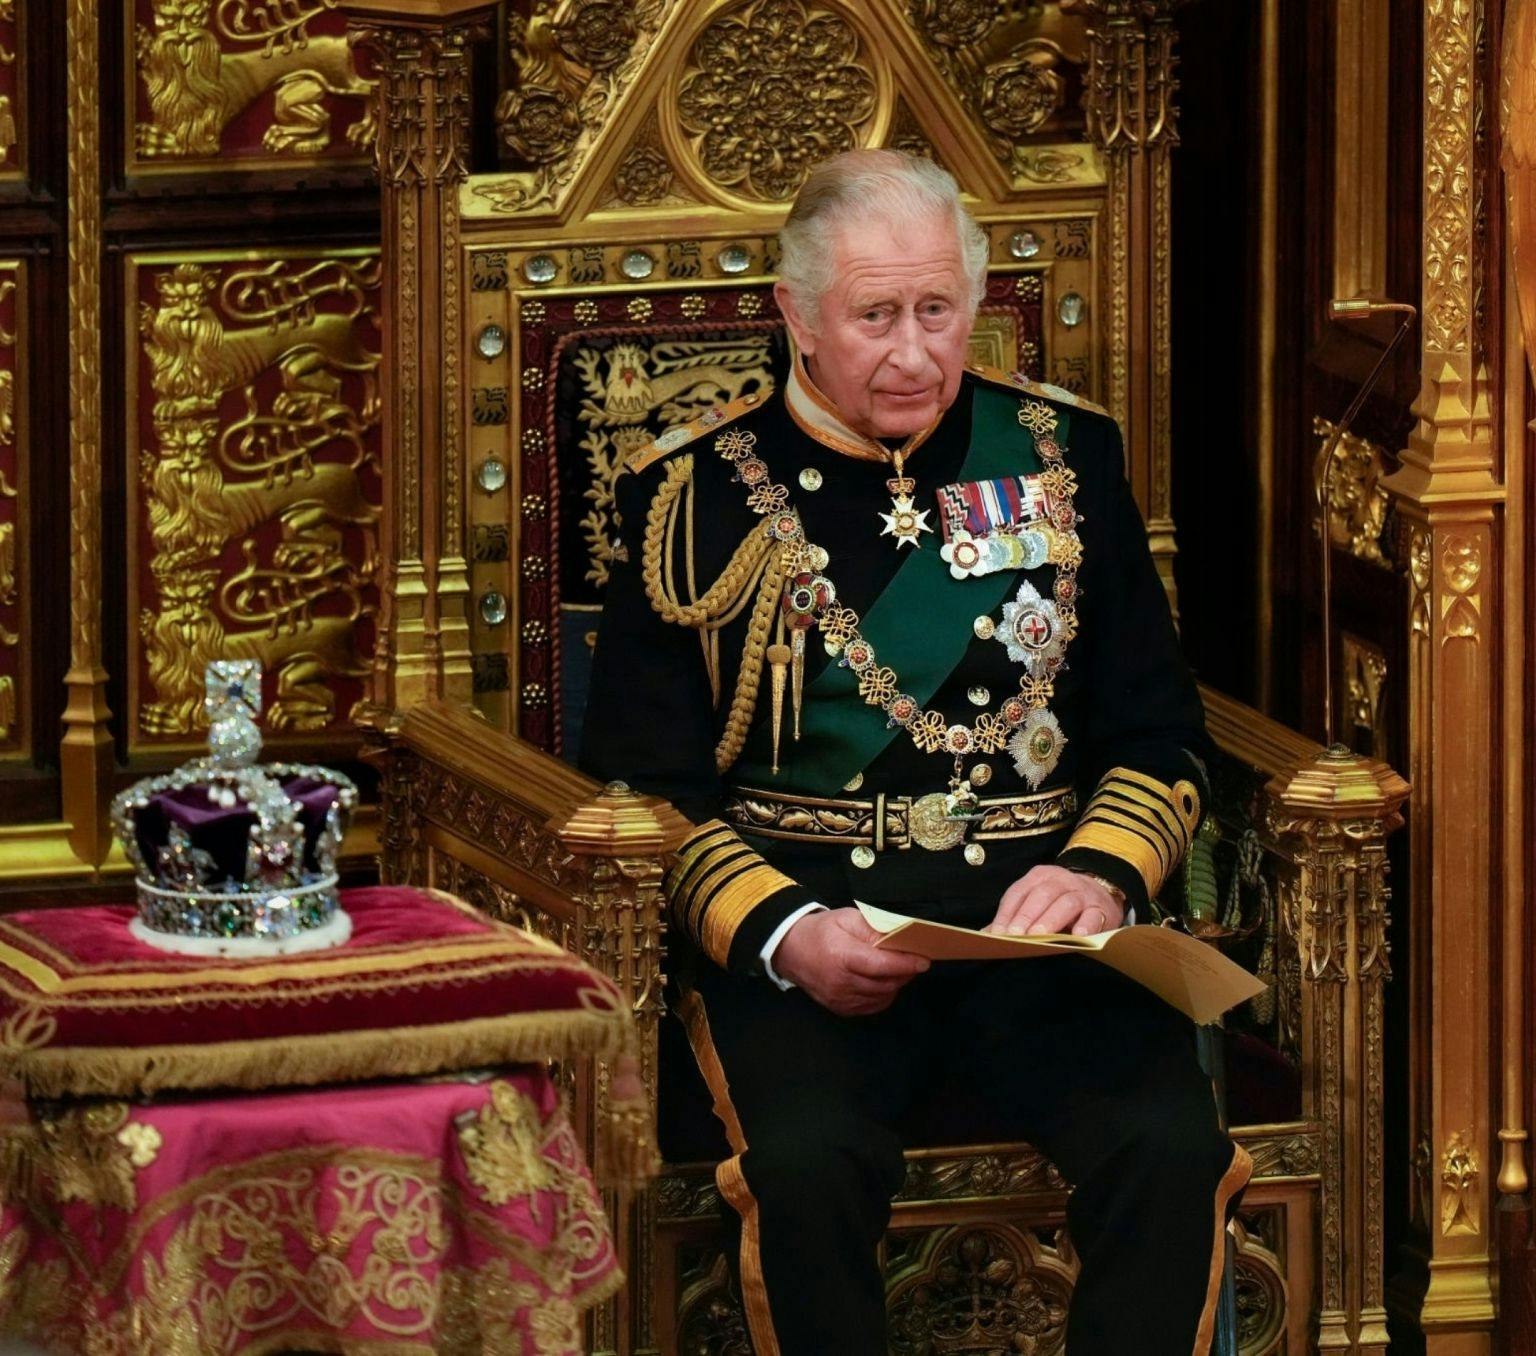 King Charles sits on a throne. A crown sit on the table to his right.